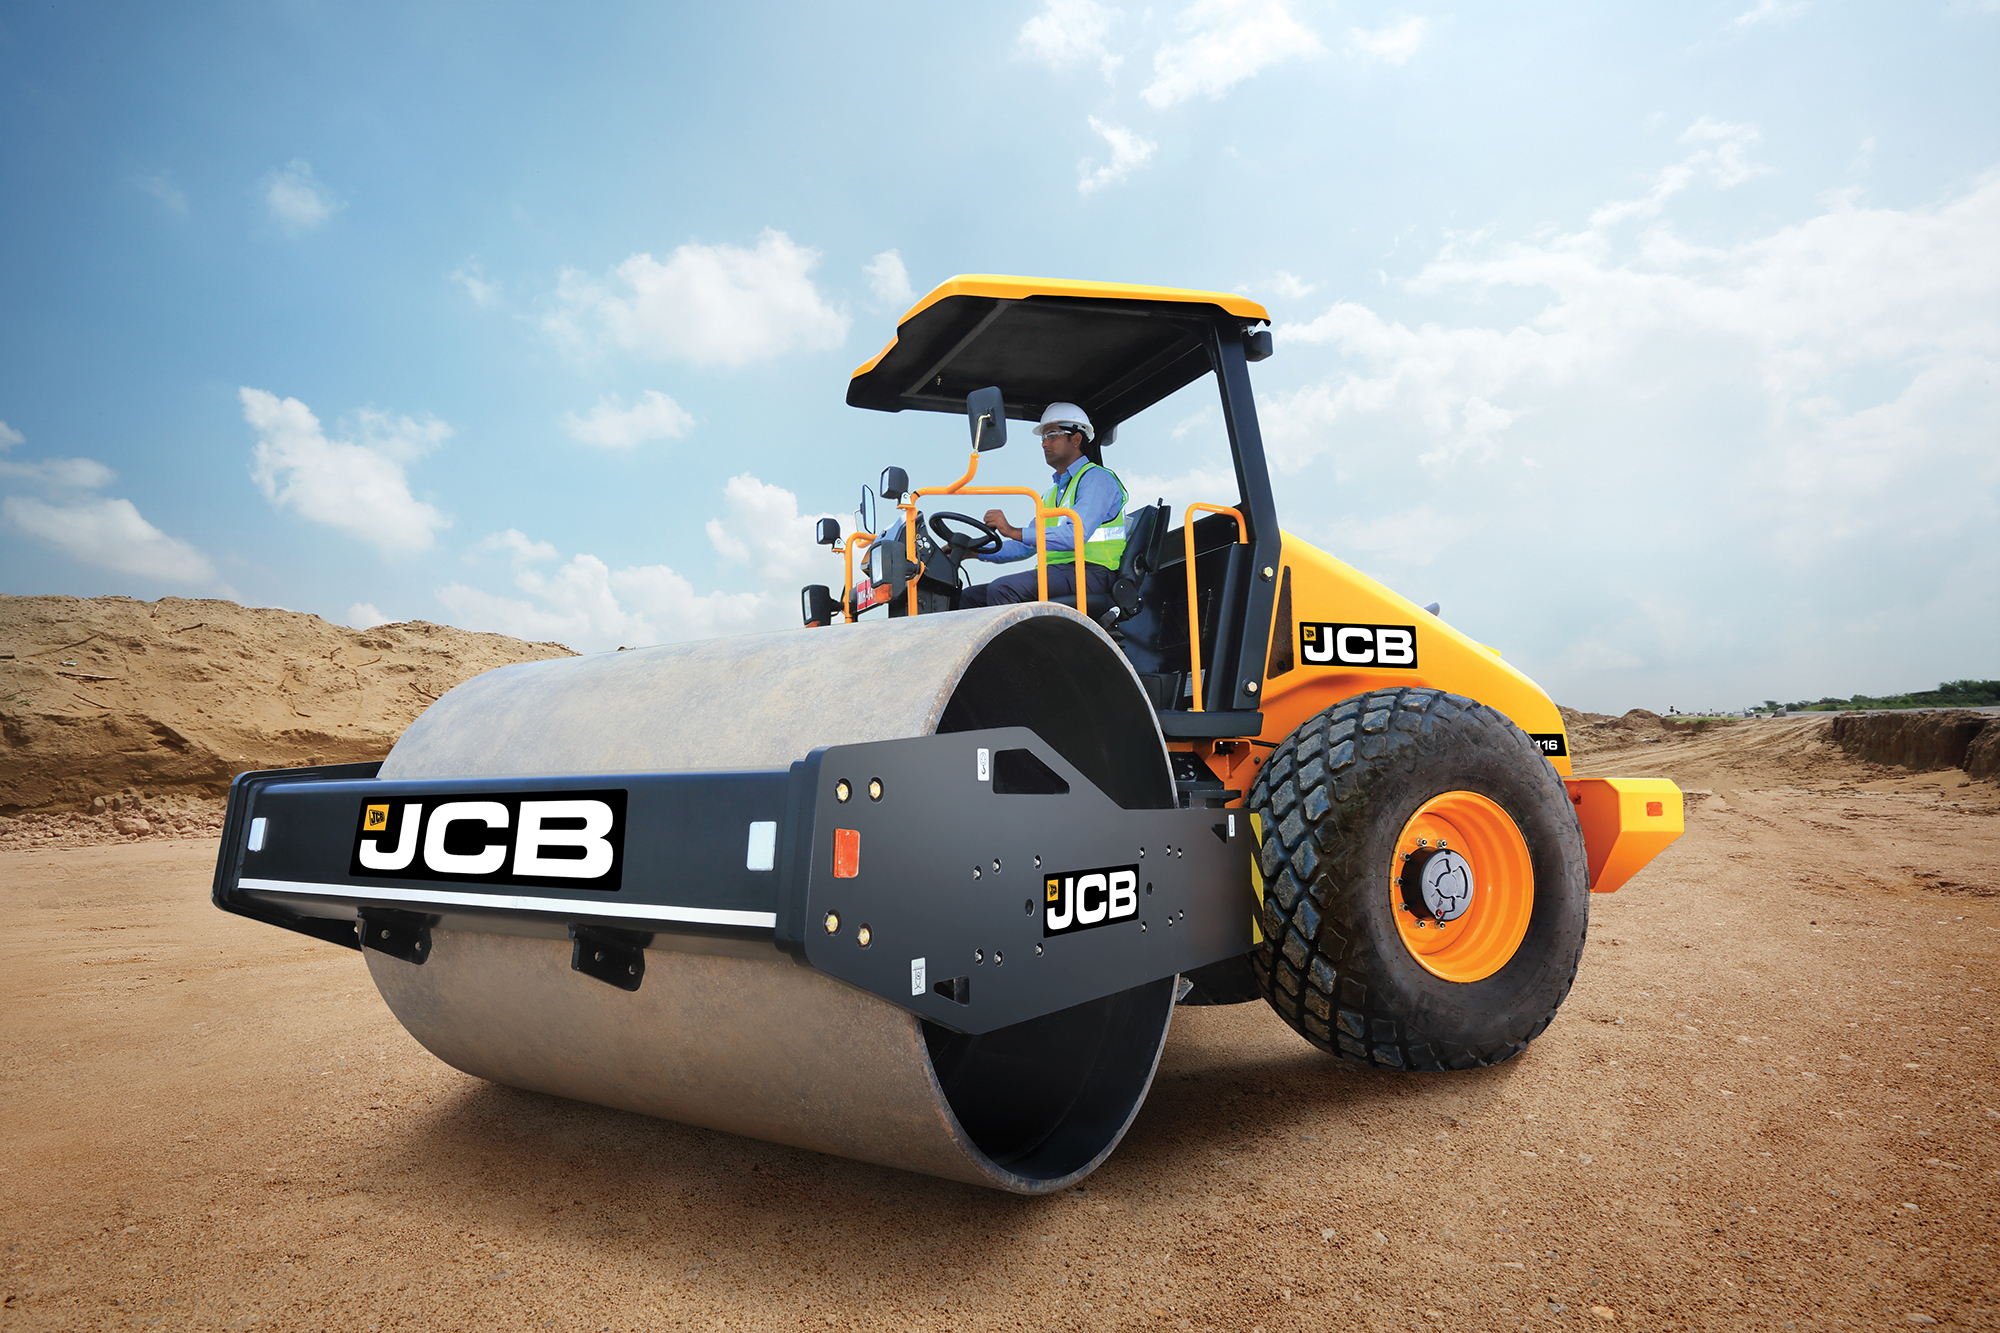 Jcb 116 Soil Compactor Delivers Better Compaction Rate B2b Purchase